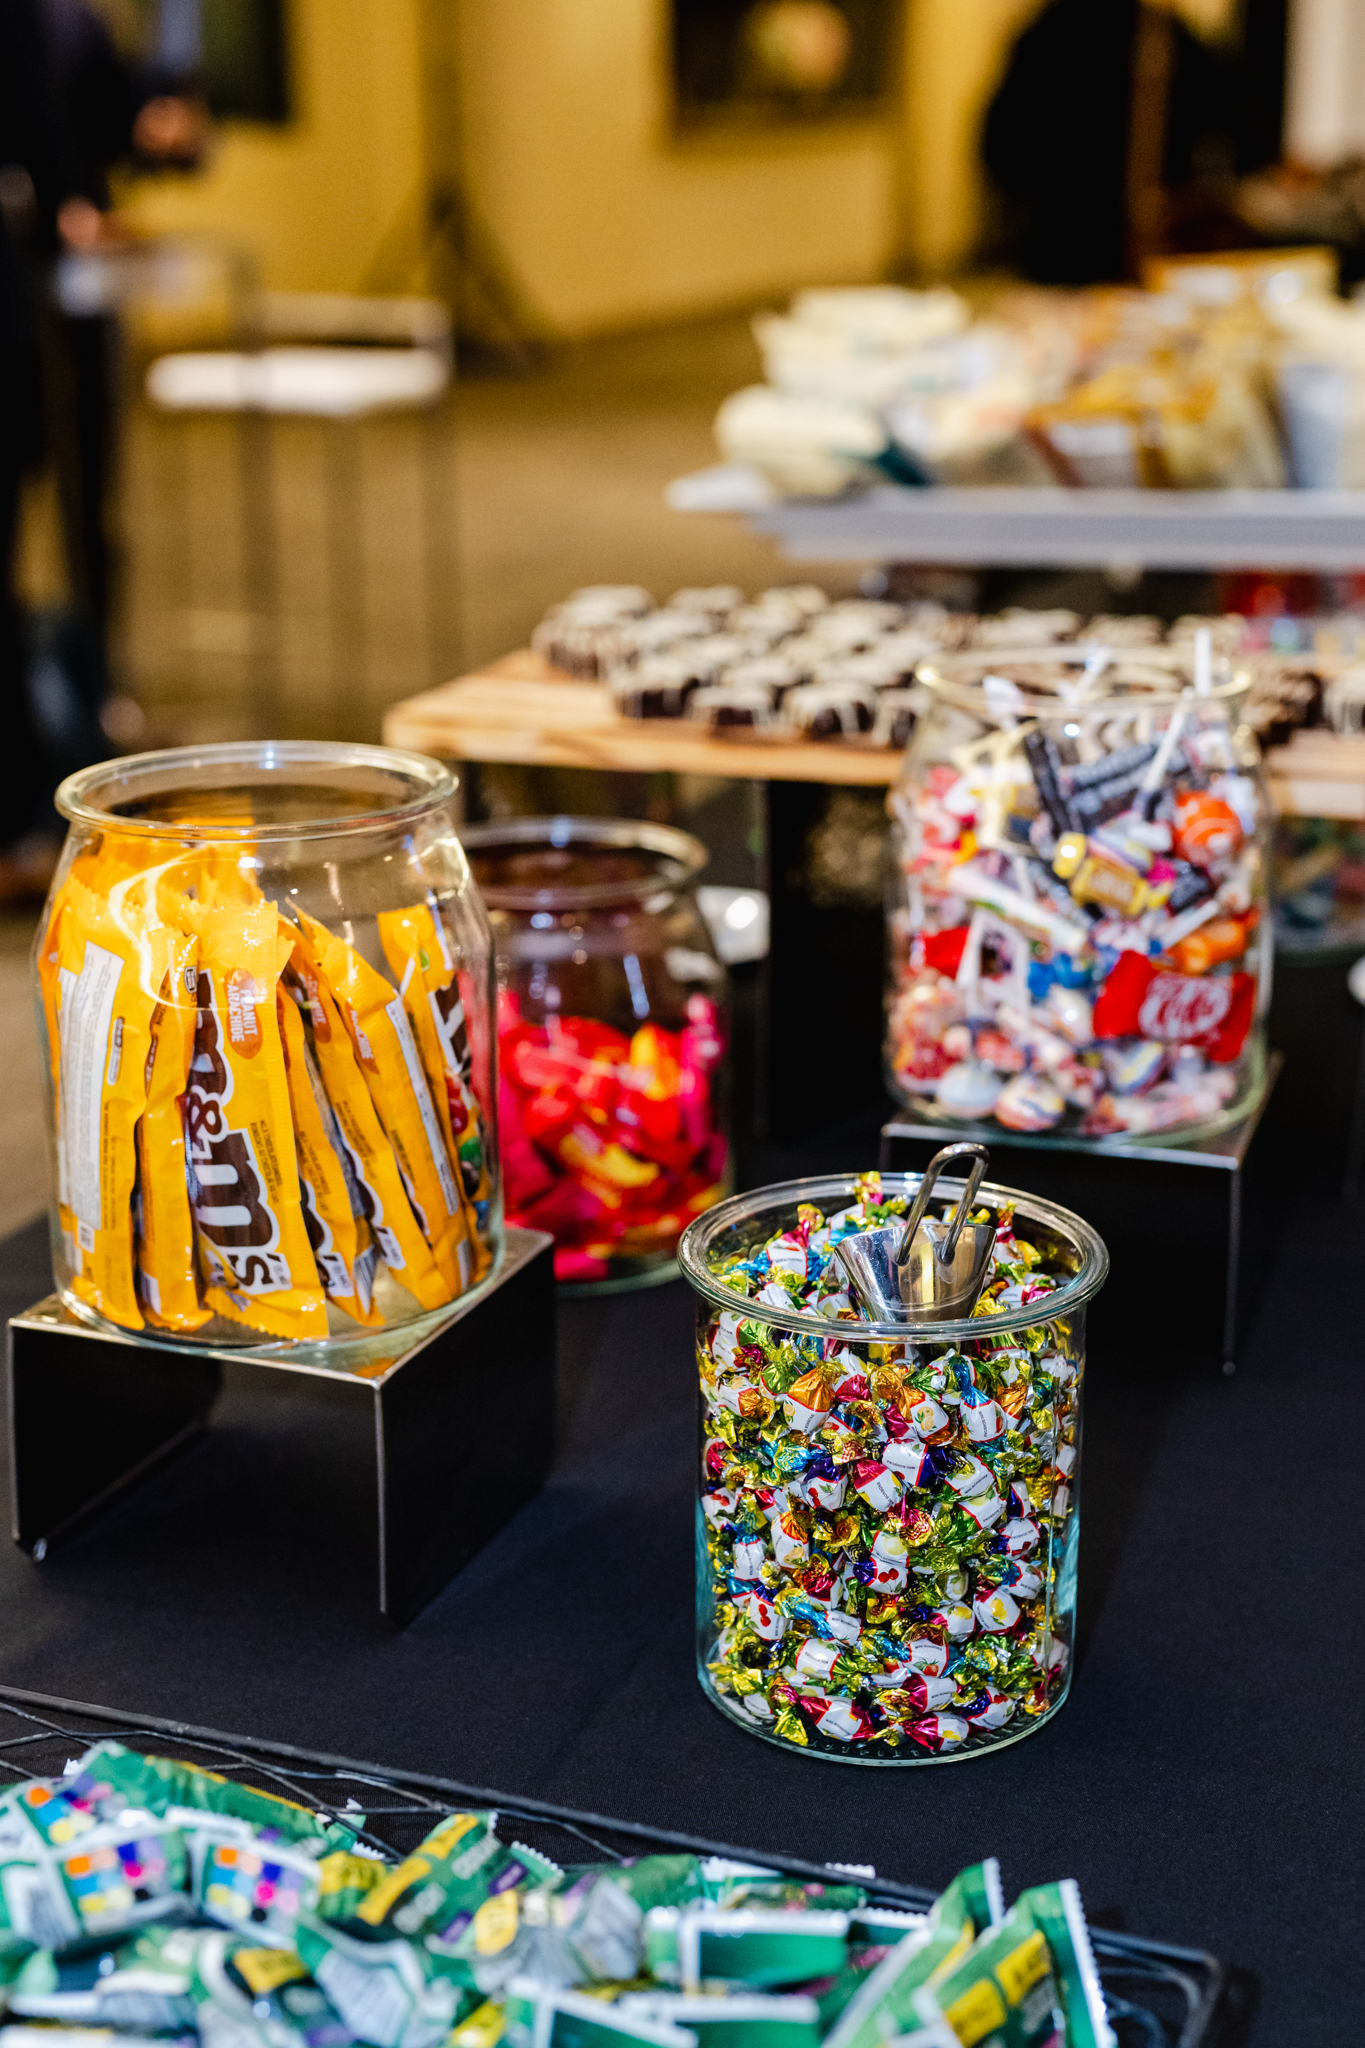 Conference Photography:
Capture the vibrant display of a carefully arranged table full of colorful and delectable candy at your next conference event.